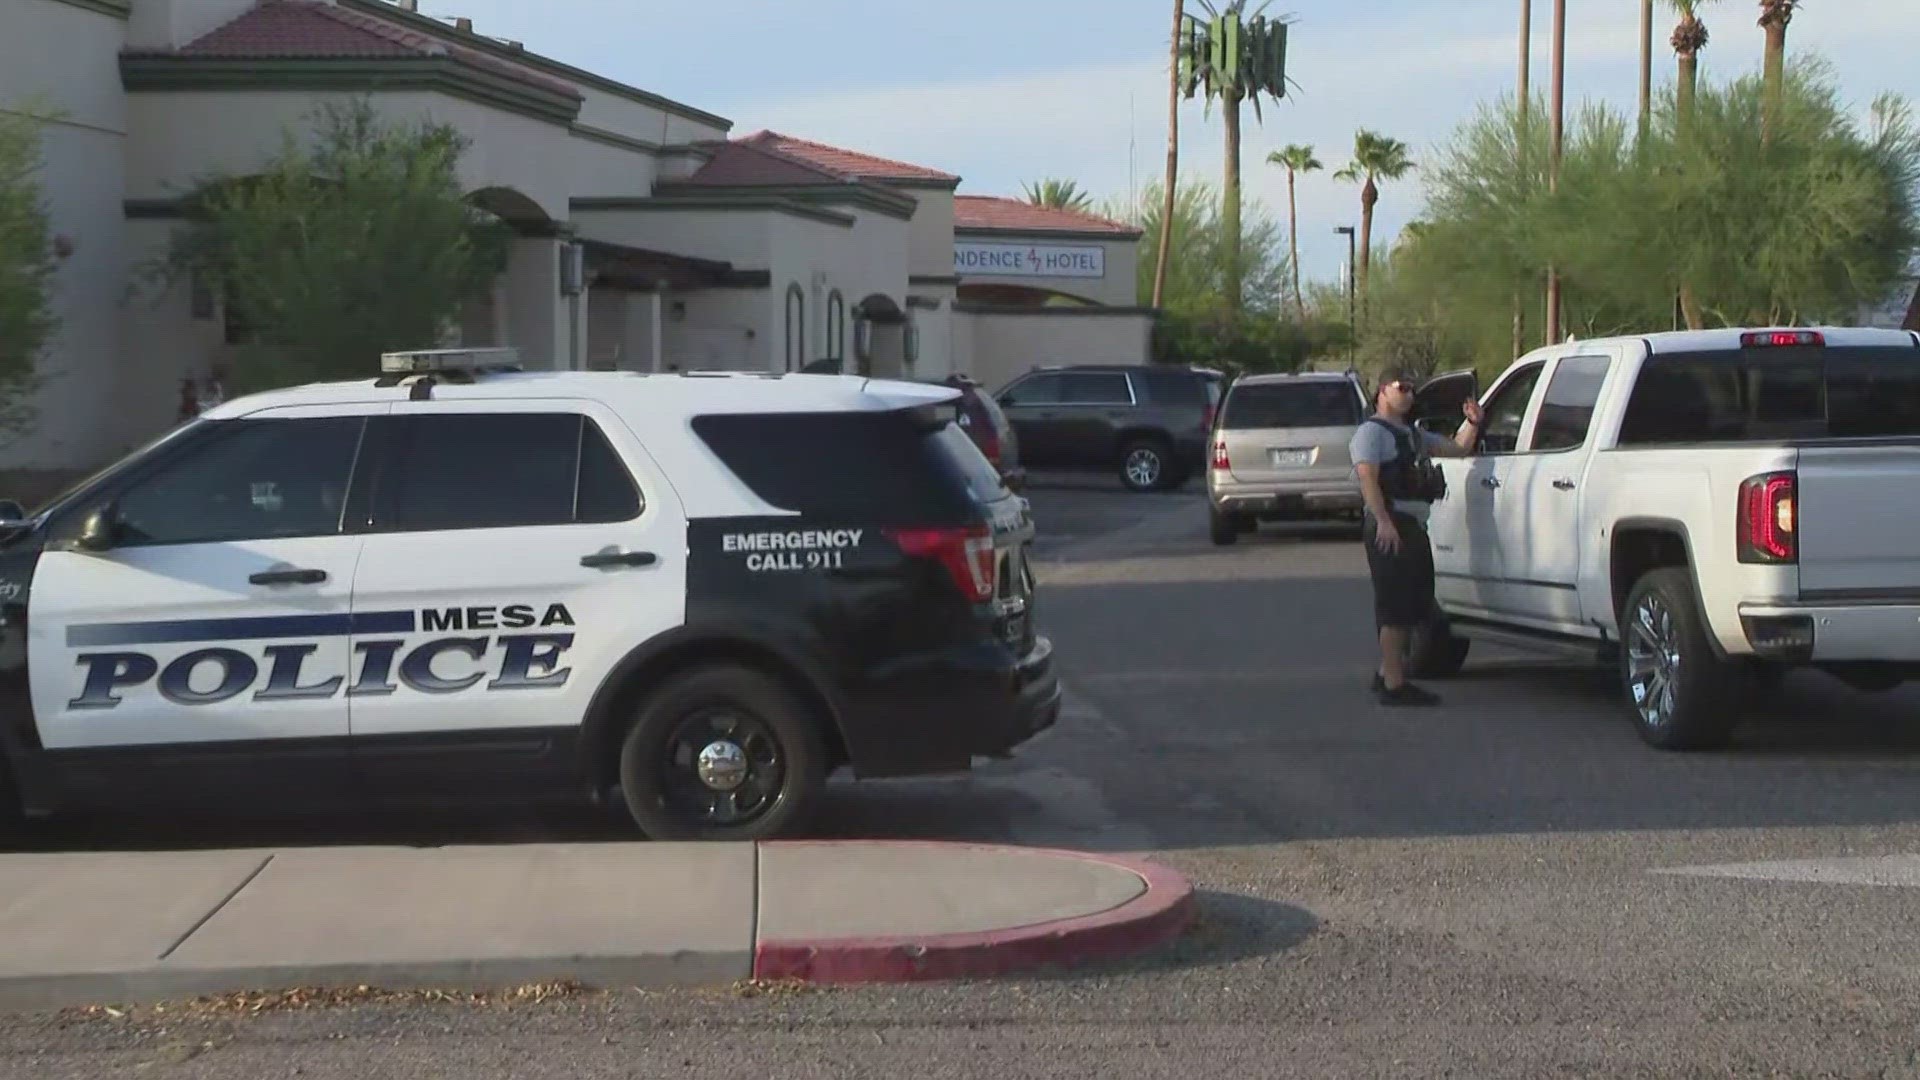 The Mesa Police Department confirmed officers were following a stolen vehicle.